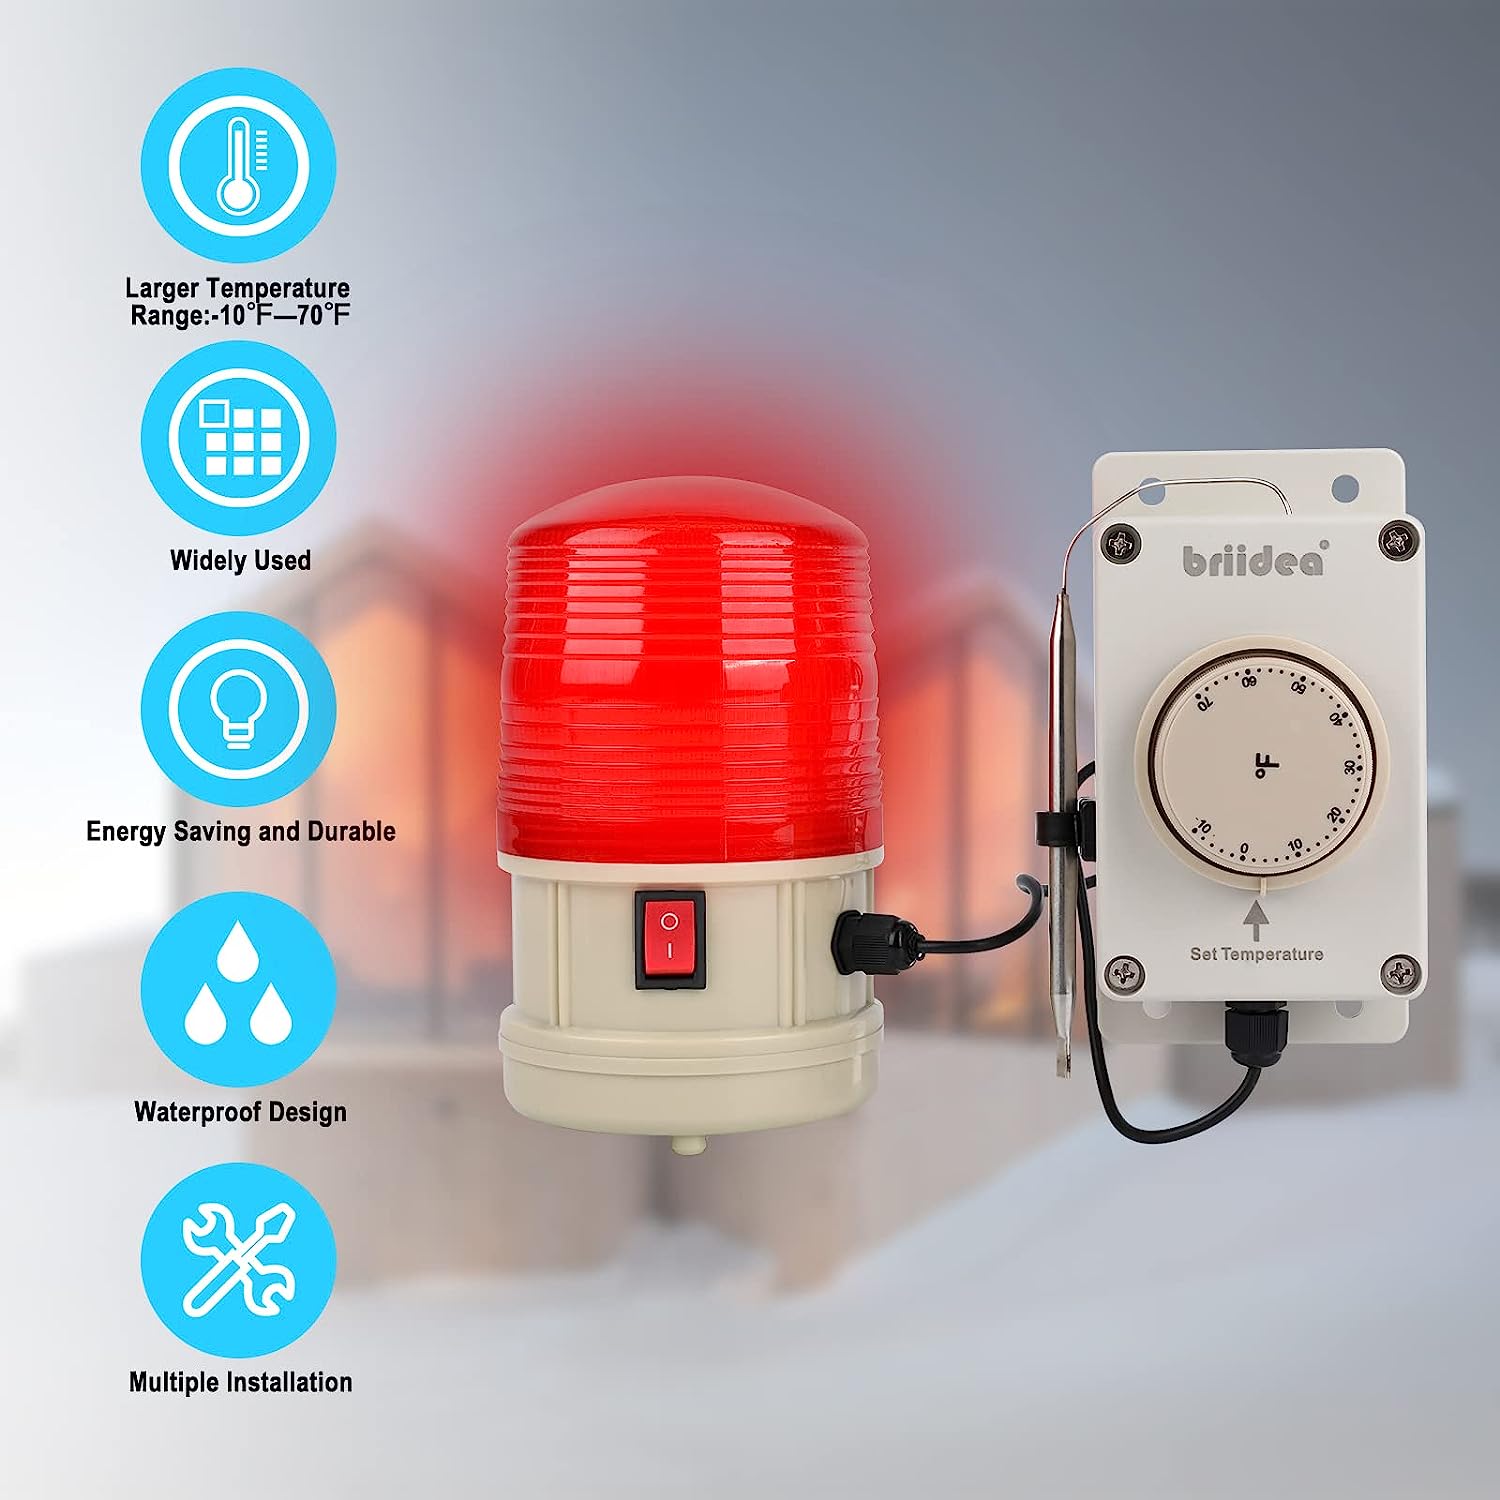 briidea Temperature Warning Light, Low Temperature Warning Light Can Set from -10°F to 70°F and Send a Dazzling Flash Alarm for Preventing Damage to Property When You're Away